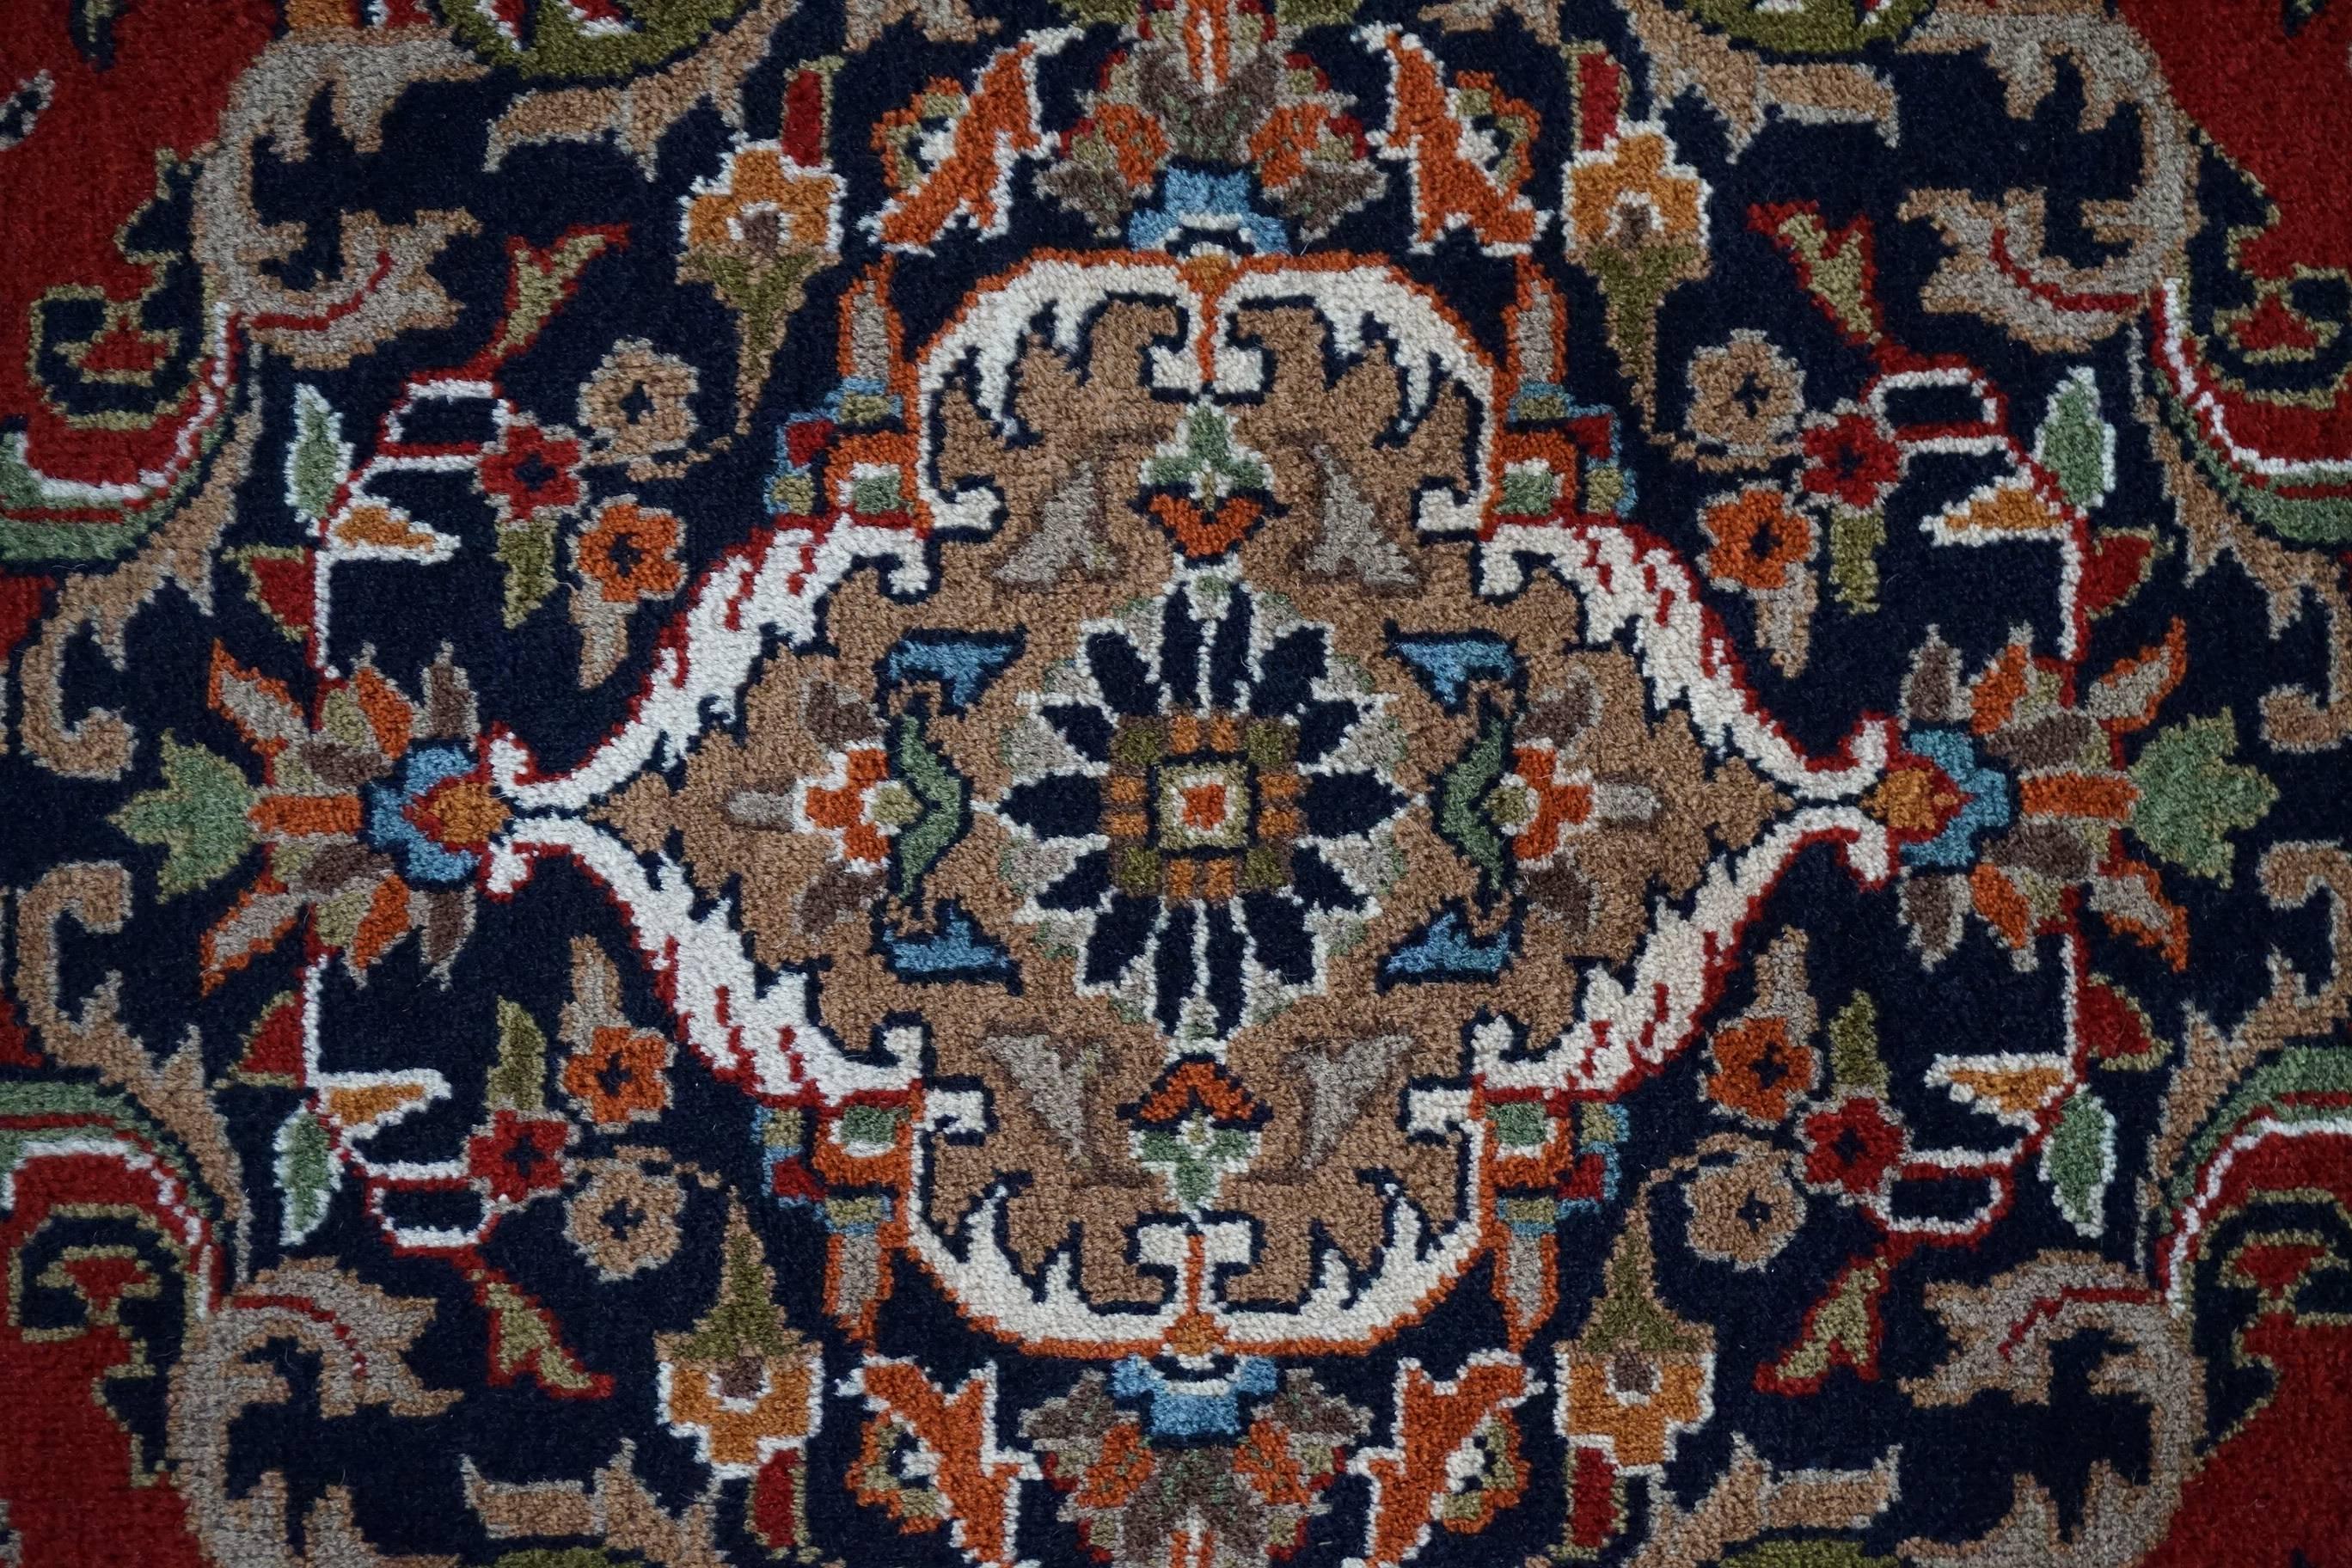 20th Century Stunning Bidjar Rug Fine Design and Vibrant Colors Hand-Knotted and Long